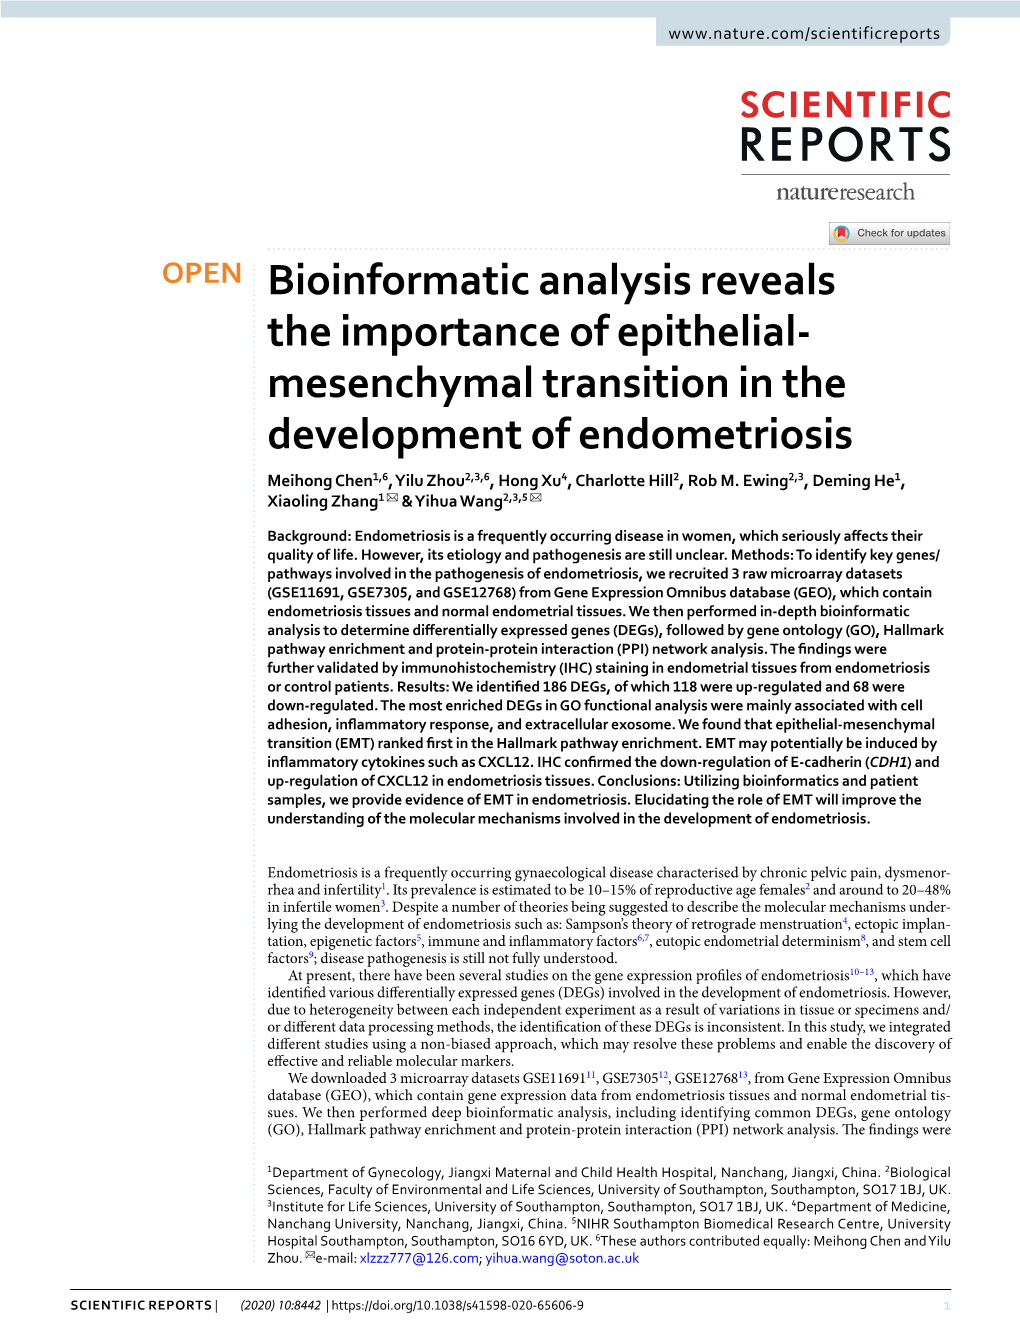 Bioinformatic Analysis Reveals the Importance of Epithelial-Mesenchymal Transition in the Development of Endometriosis